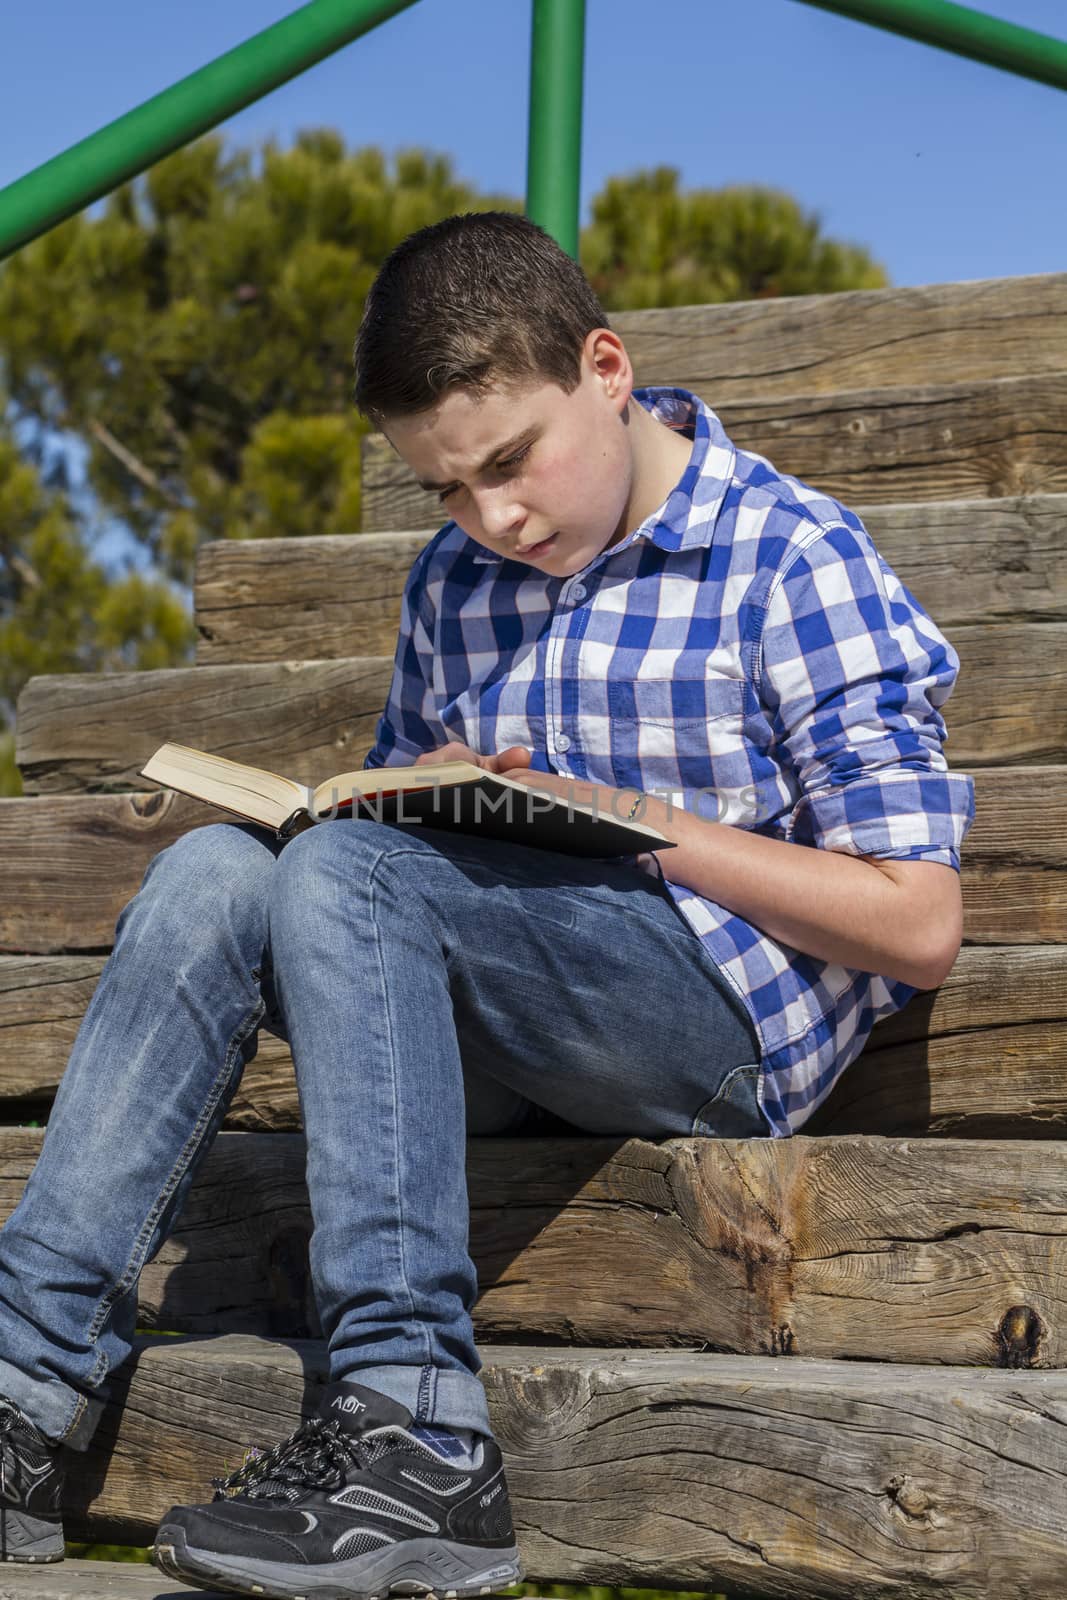 Young boy reading a book in wooden stairs, summer